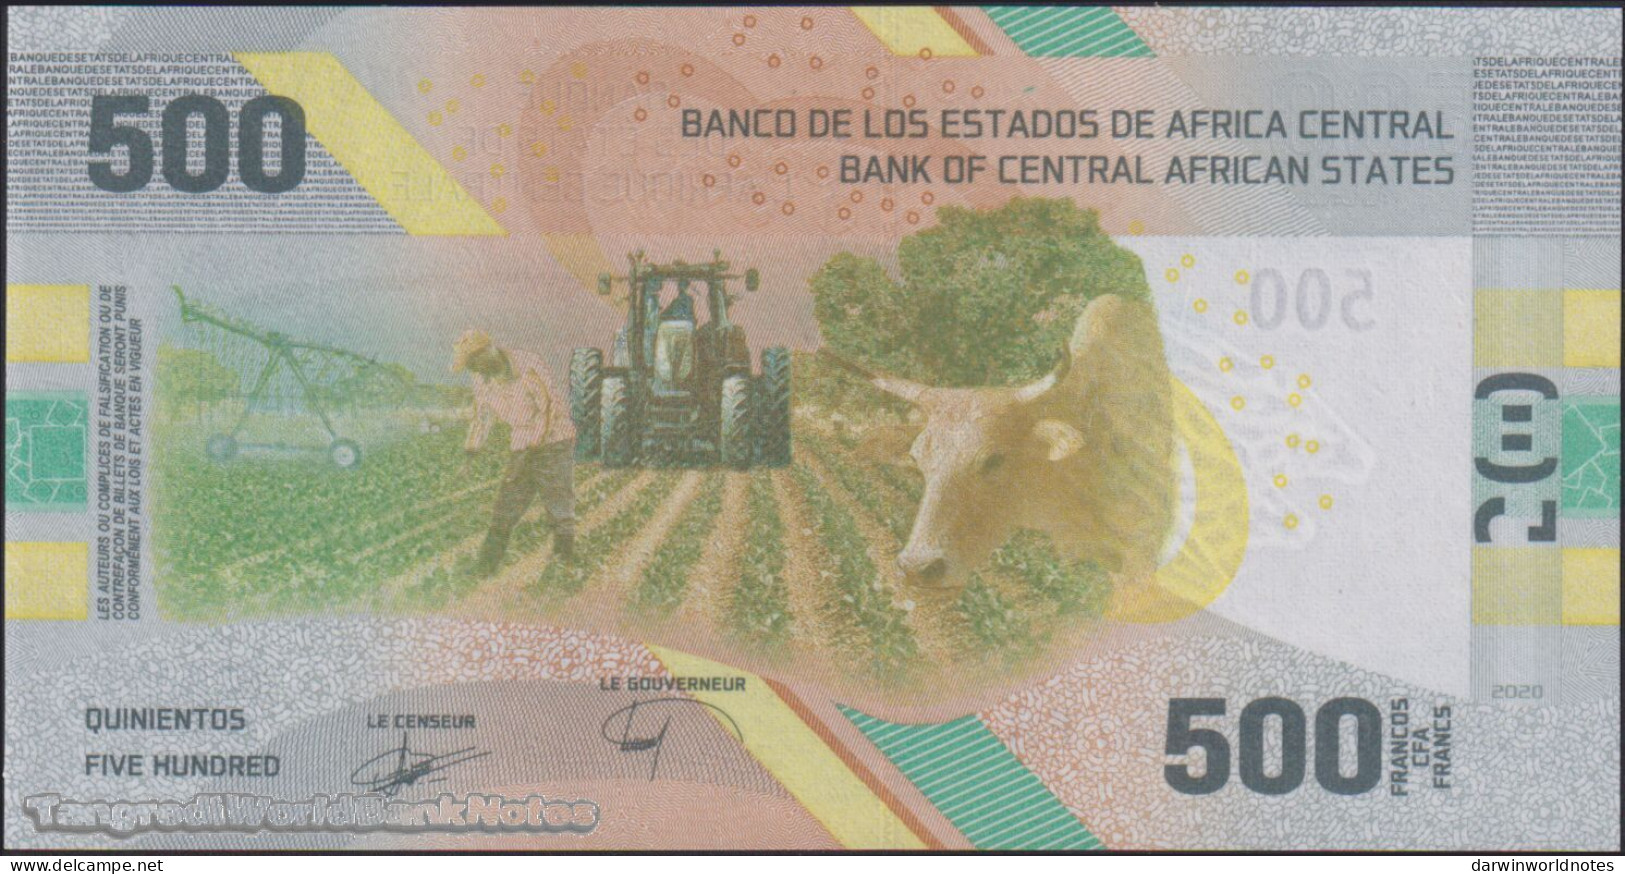 DWN - CENTRAL AFRICAN STATES 700 - 500 Francs 2020 (2022) UNC - Various Prefixes - Central African States